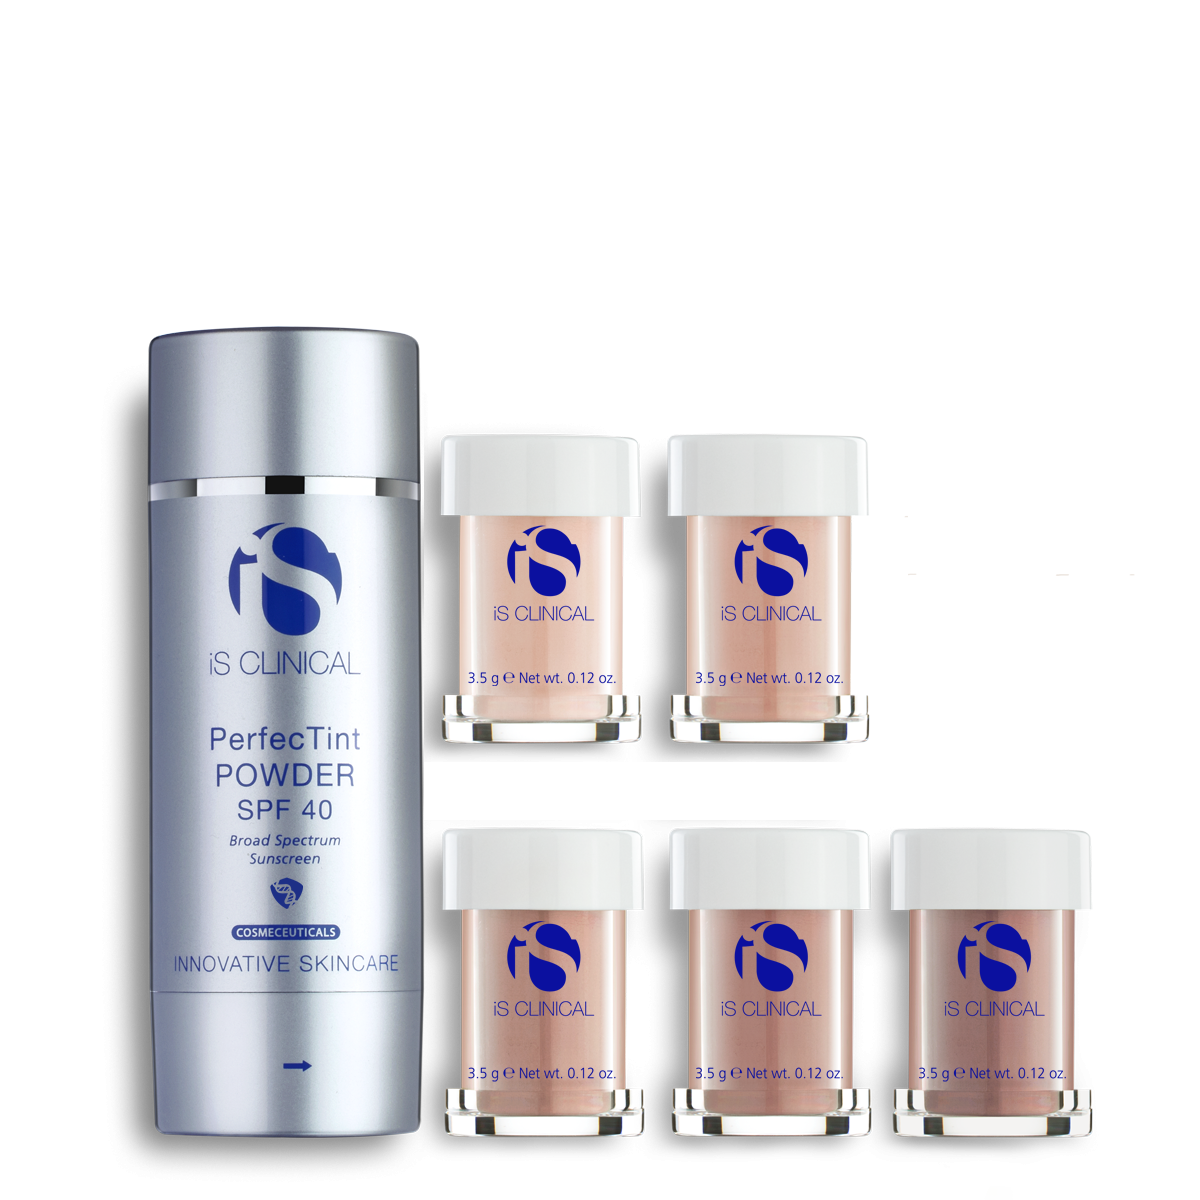 iS Clinical PerfecTint Powder SPF 40 - a cosmetic powder that provides silky smooth broad spectrum coverage to help protect skin against the visible signs of photoaging while minimizing the appearance of pores and absorbing surface oil to create a flawless finish. Showing all color shades available. 